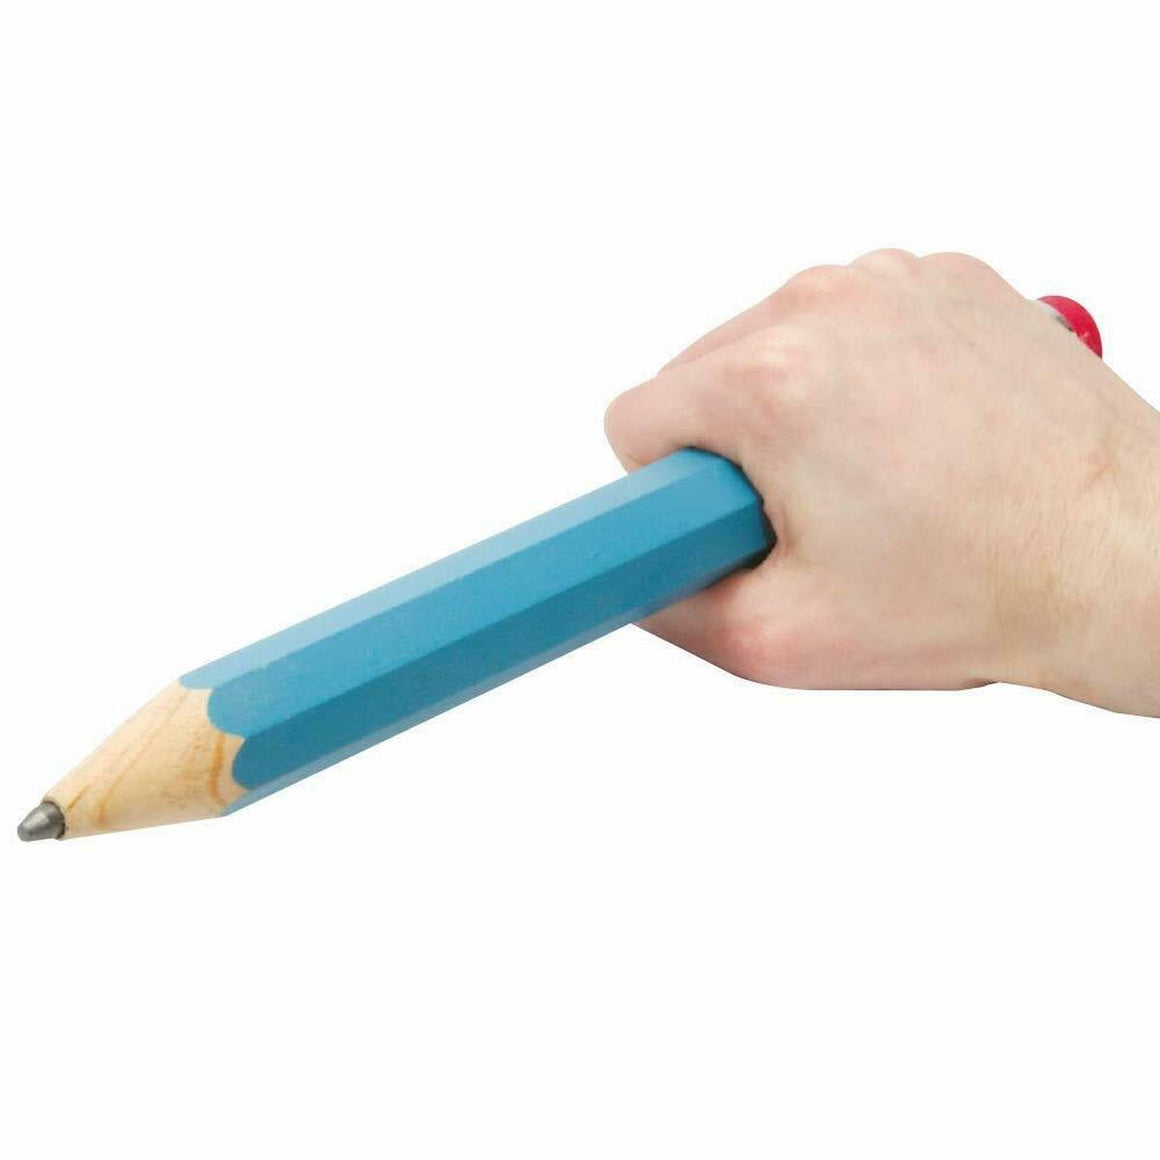 A hand holding a novelty jumbo oversized lead pencil. The colour of the pencil wrapping is blue.